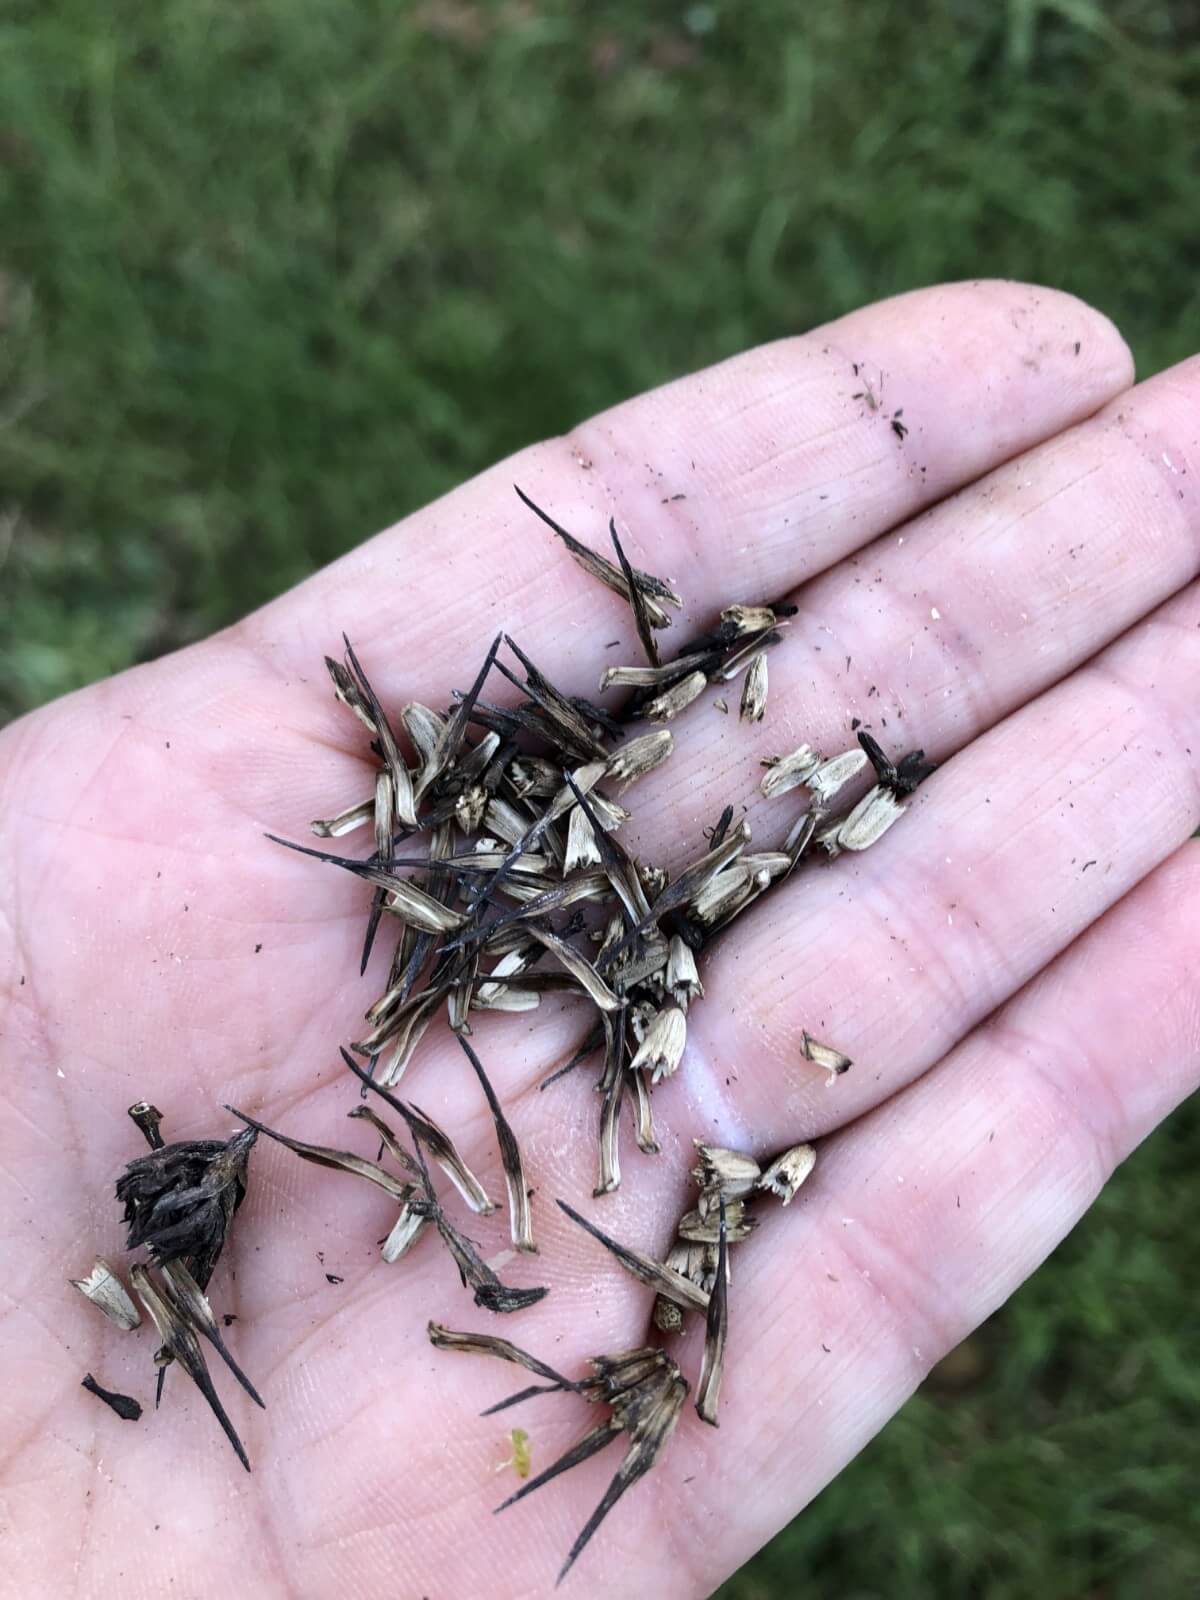 Dried flower seeds from coneflower held in a hand